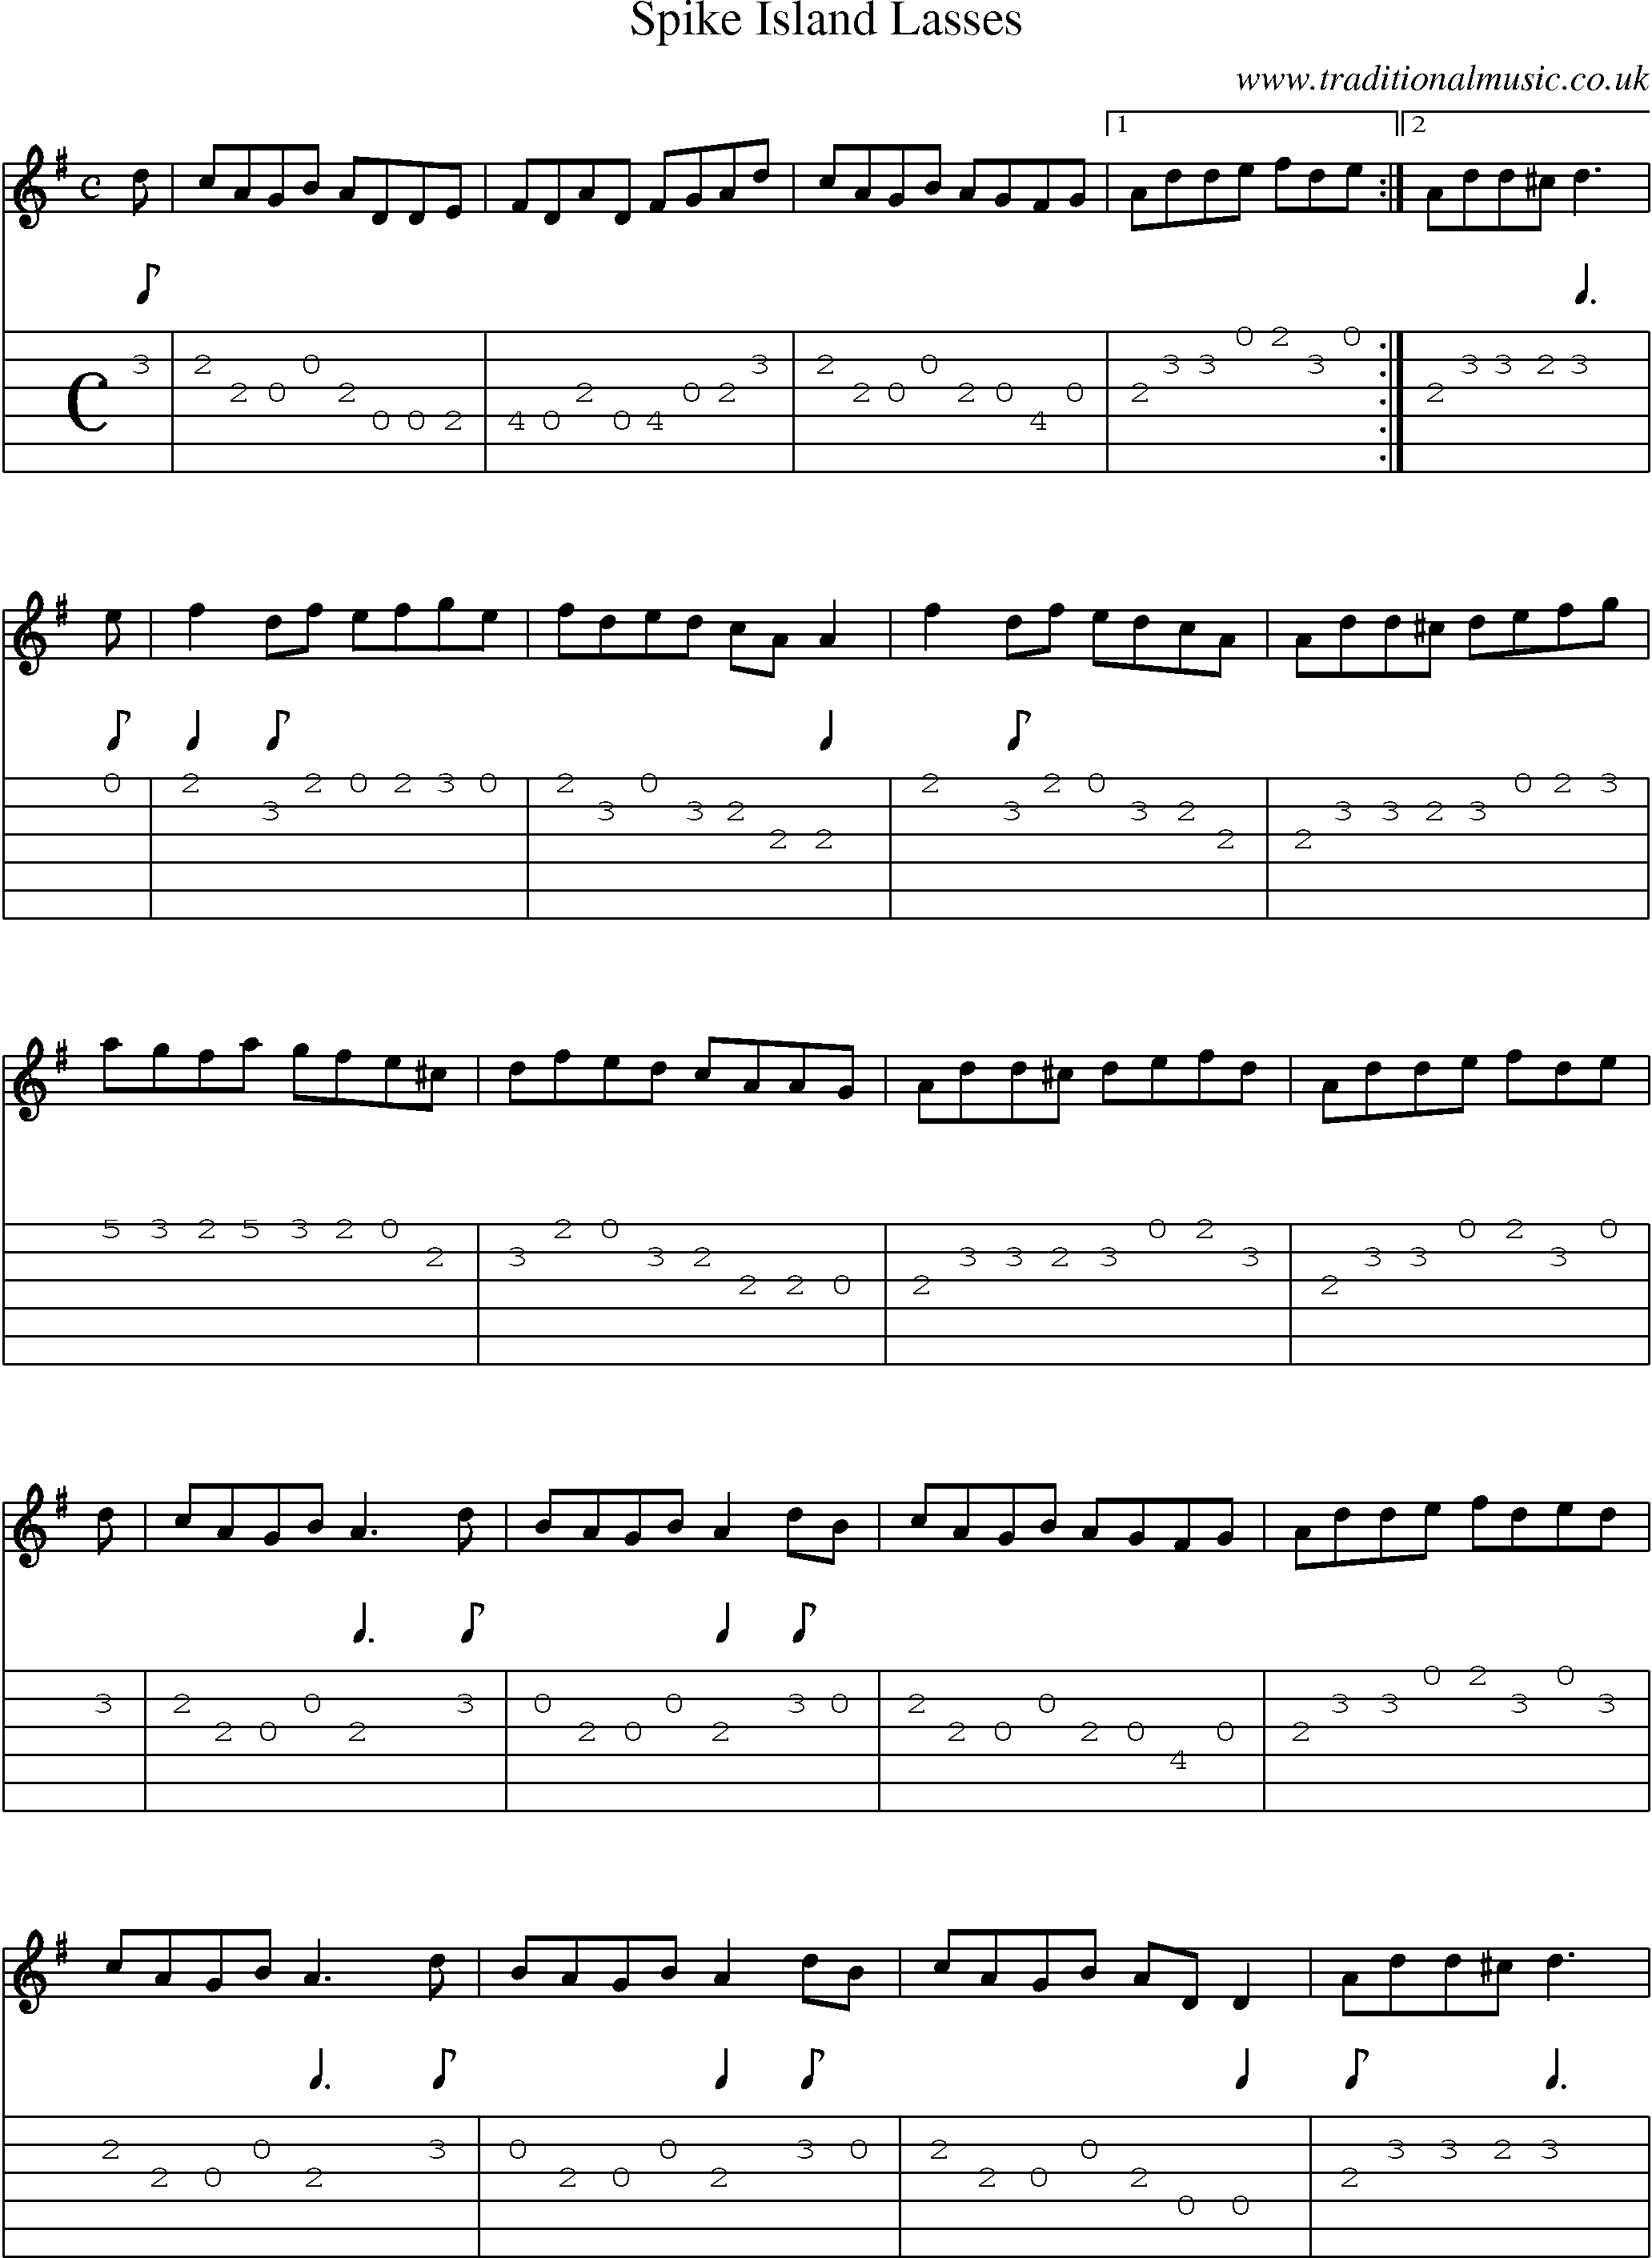 Music Score and Guitar Tabs for Spike Island Lasses